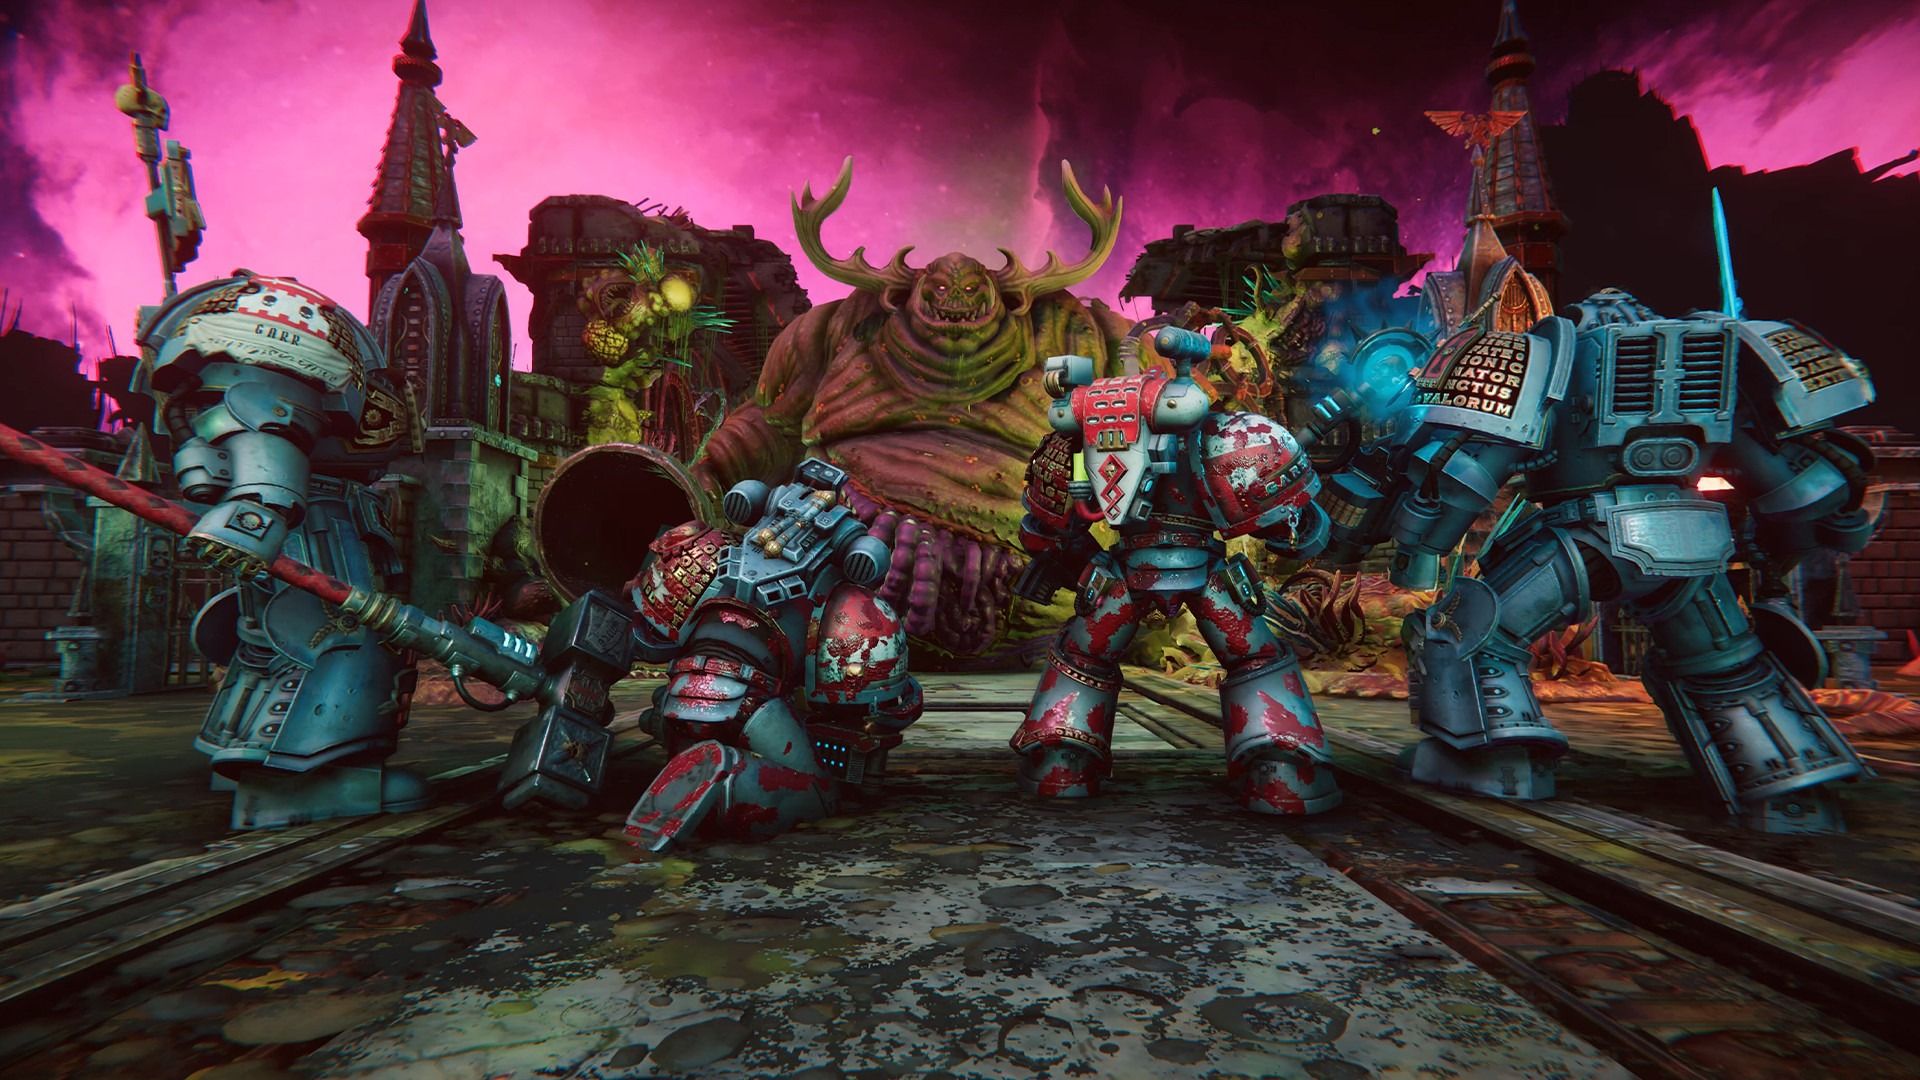 Warhammer 40,000: Chaos Gate - Daemonhunters download the new version for iphone